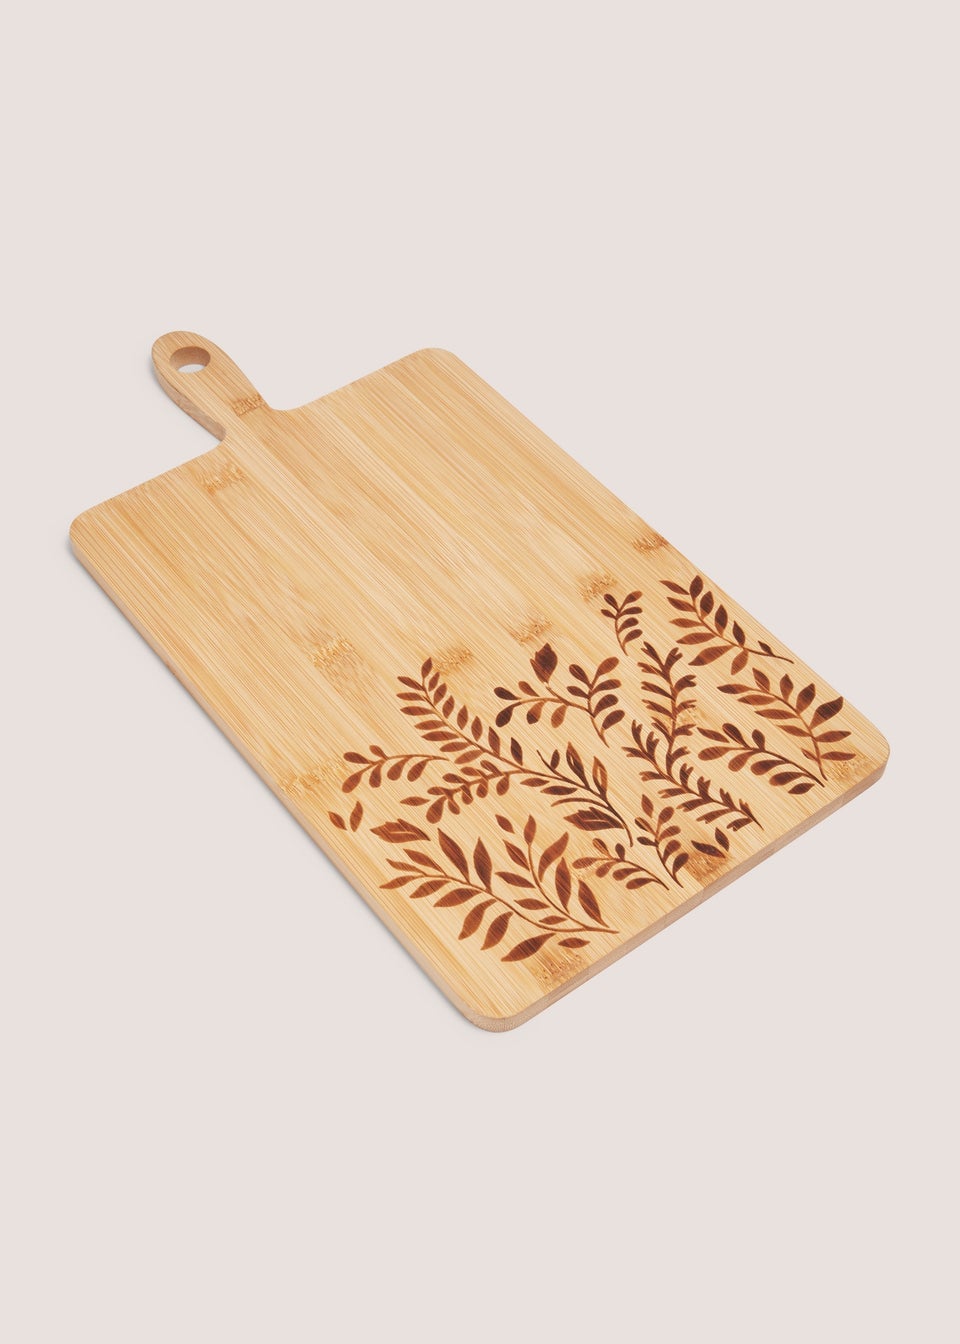 Floral Embossed Chopping Board (41cm x 22cm)